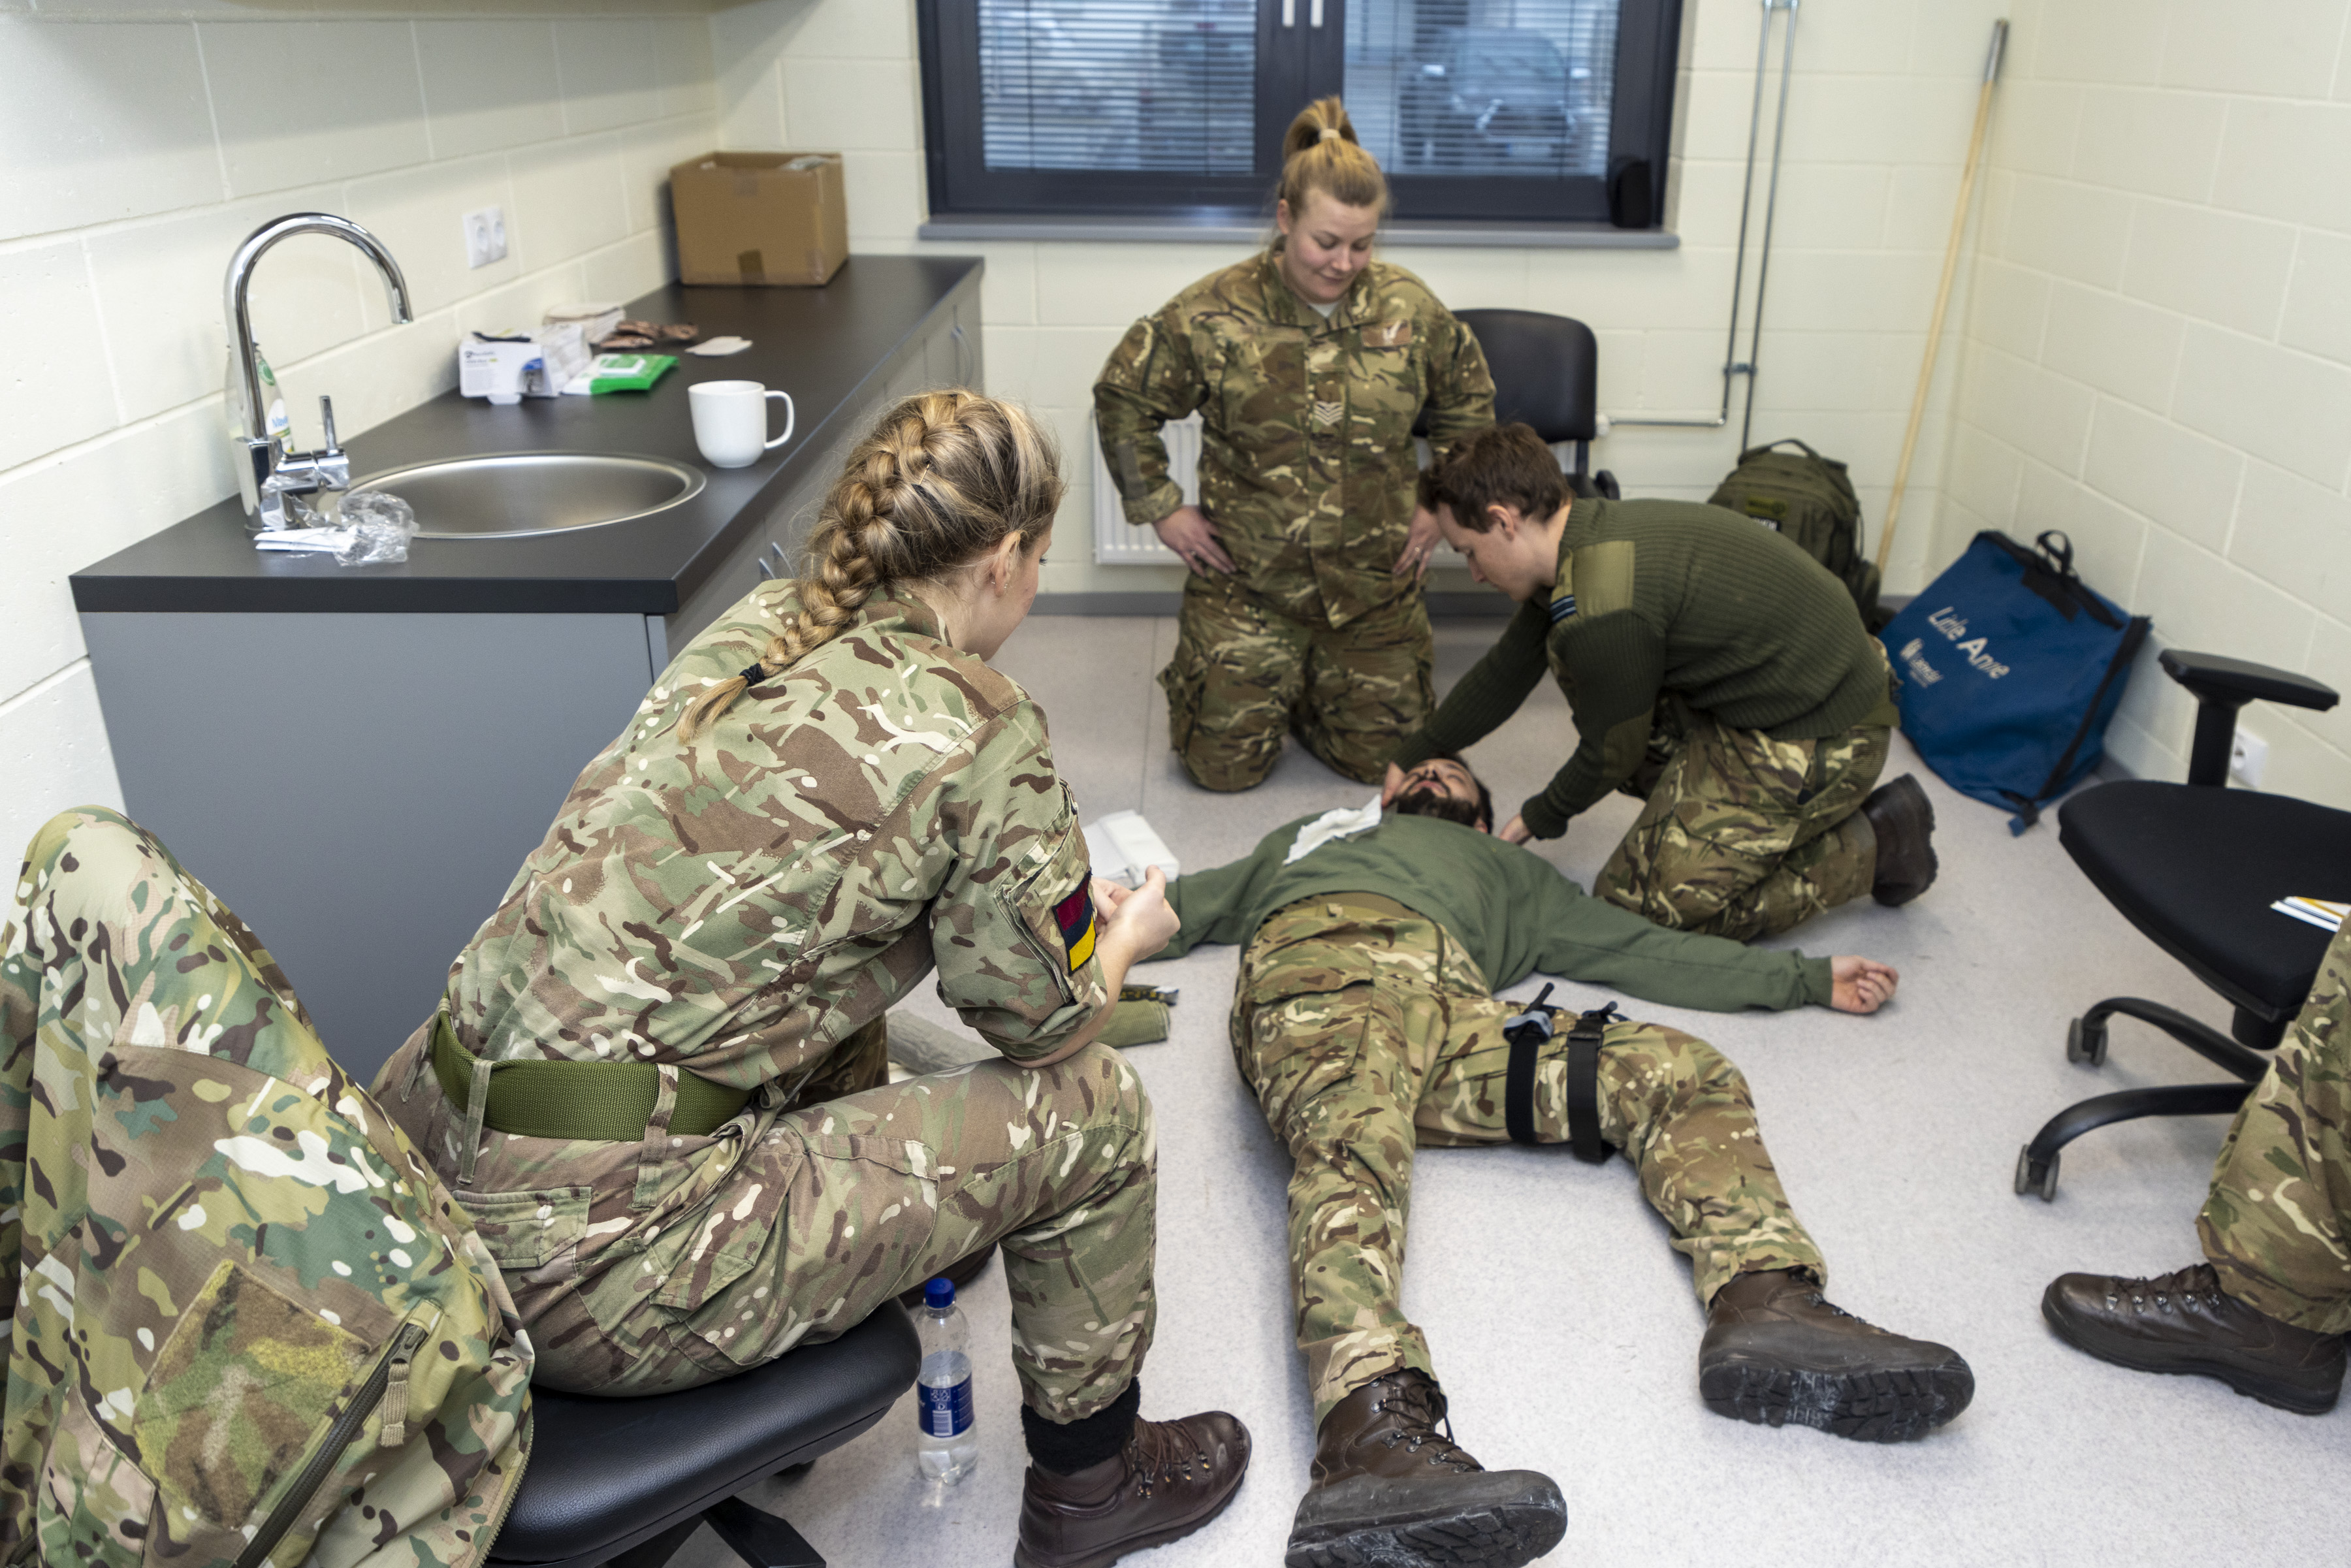 Image shows RAF aviators attending improvised medic scene with patient on the floor in a tea bar. 